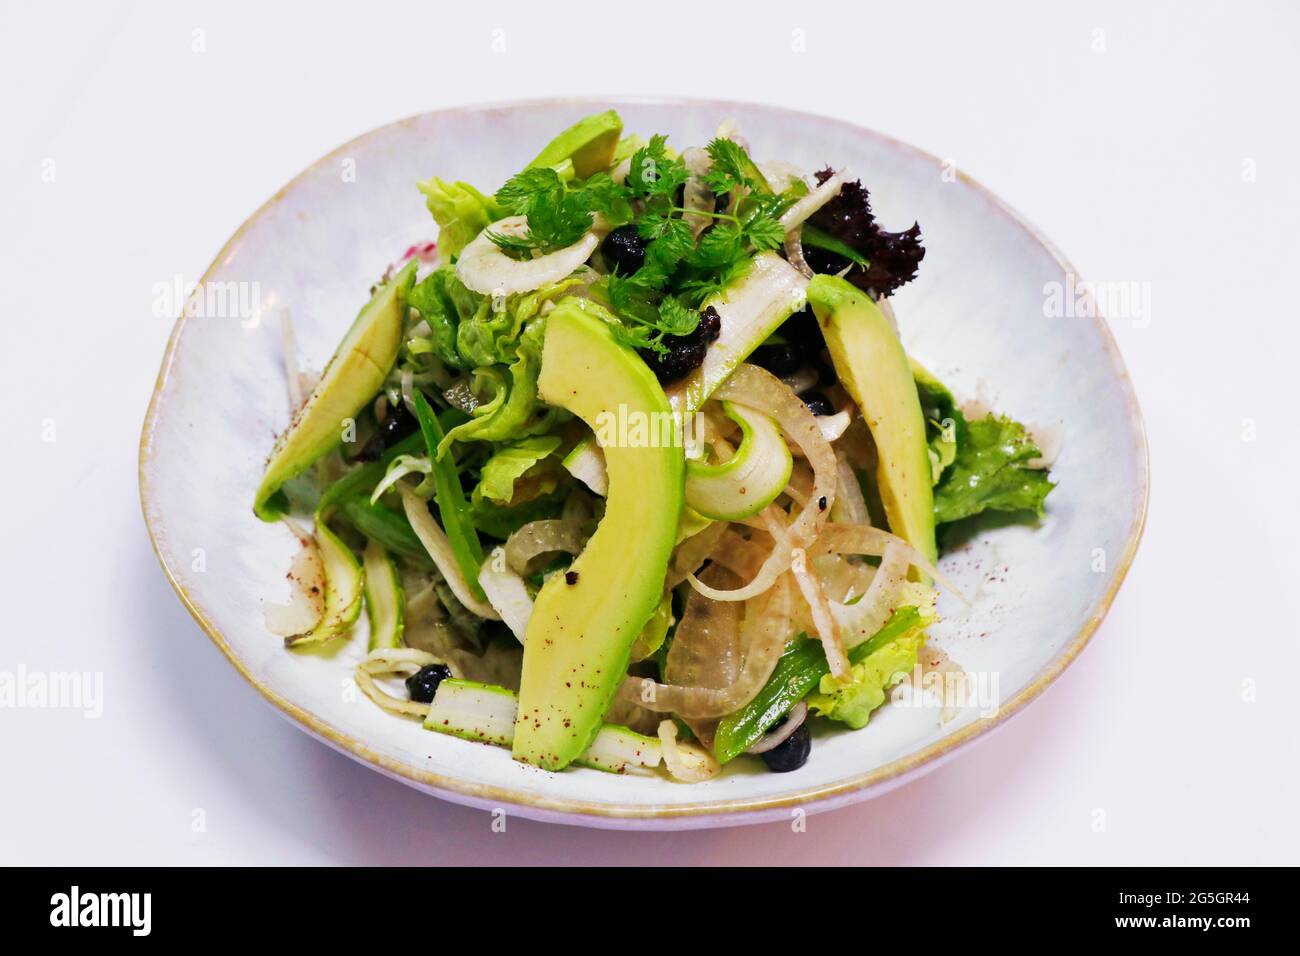 vegetable salad bowl with asparagus, fennel, avocado, raisins and mix lettuce in a bowl Stock Photo